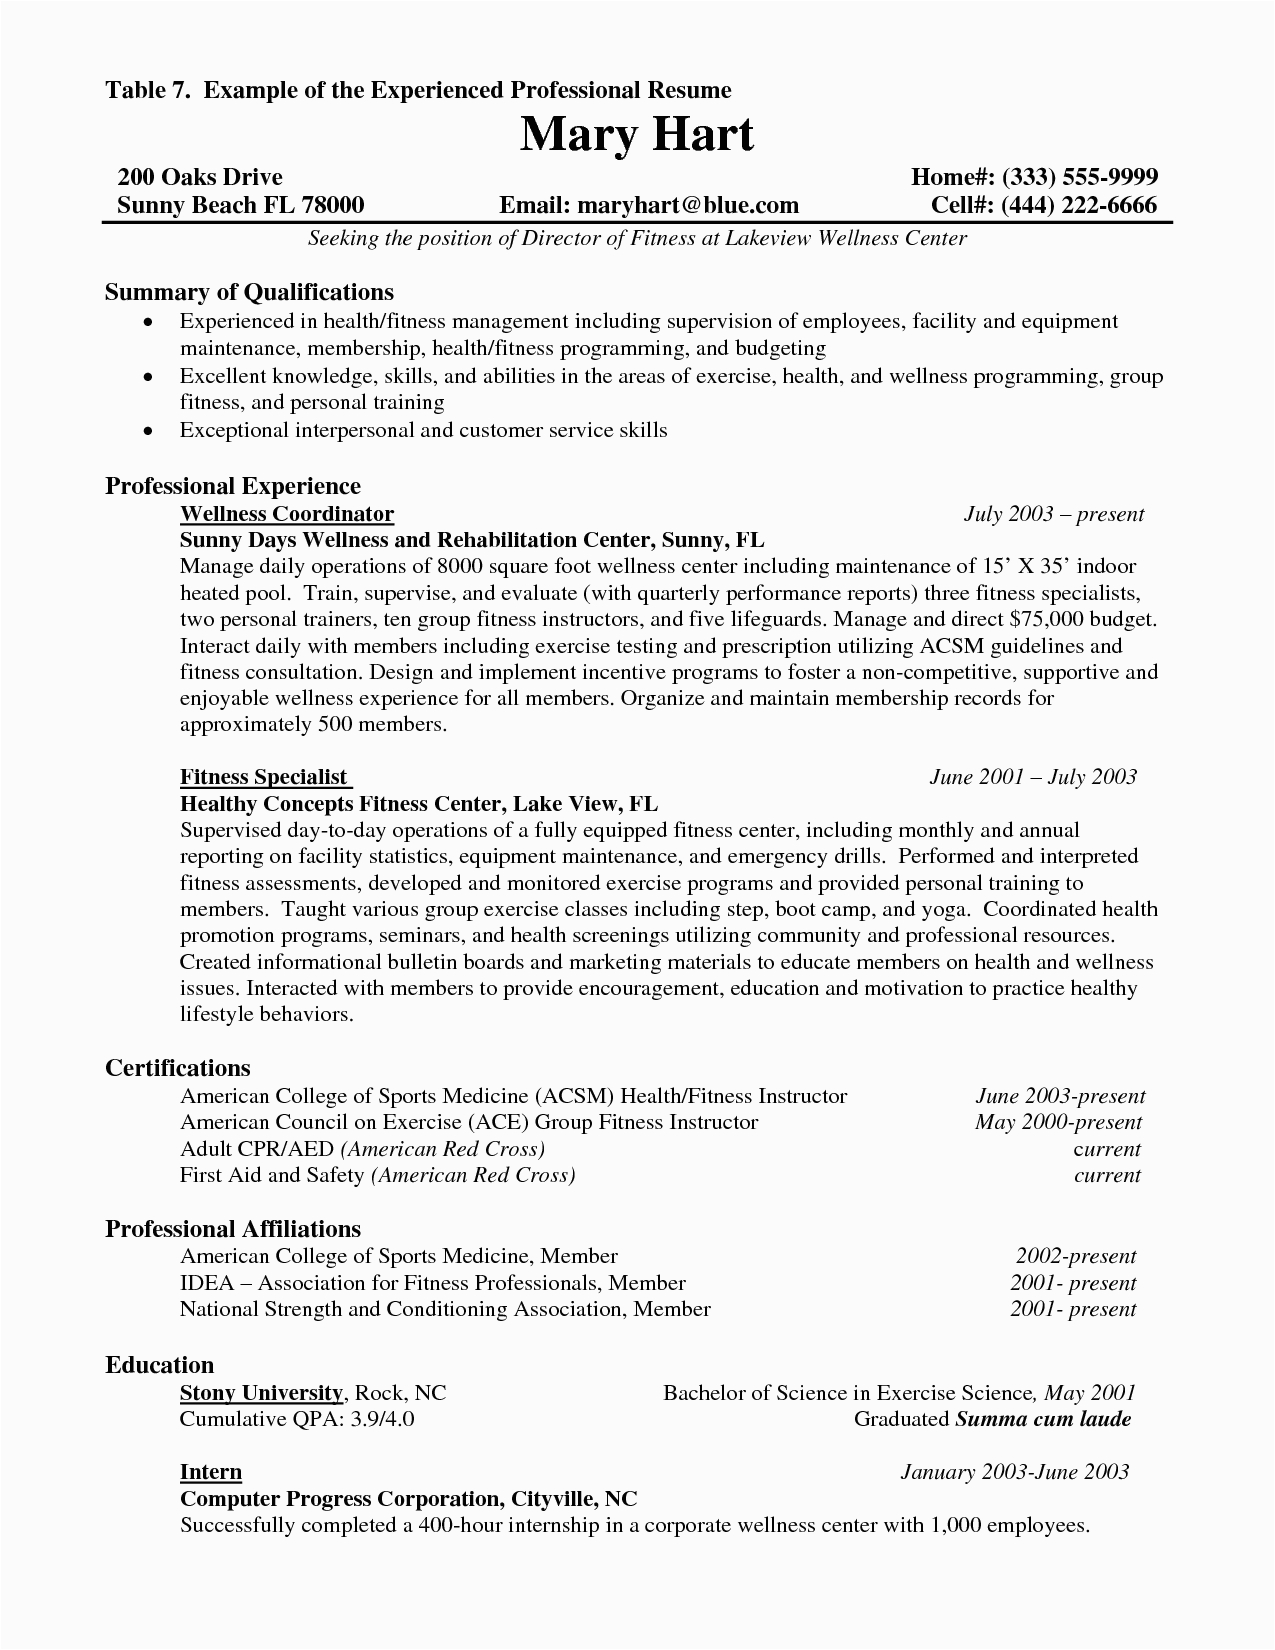 Sample Achievements In Resume for Experienced Professionals Resume format Experienced 2017 Guide